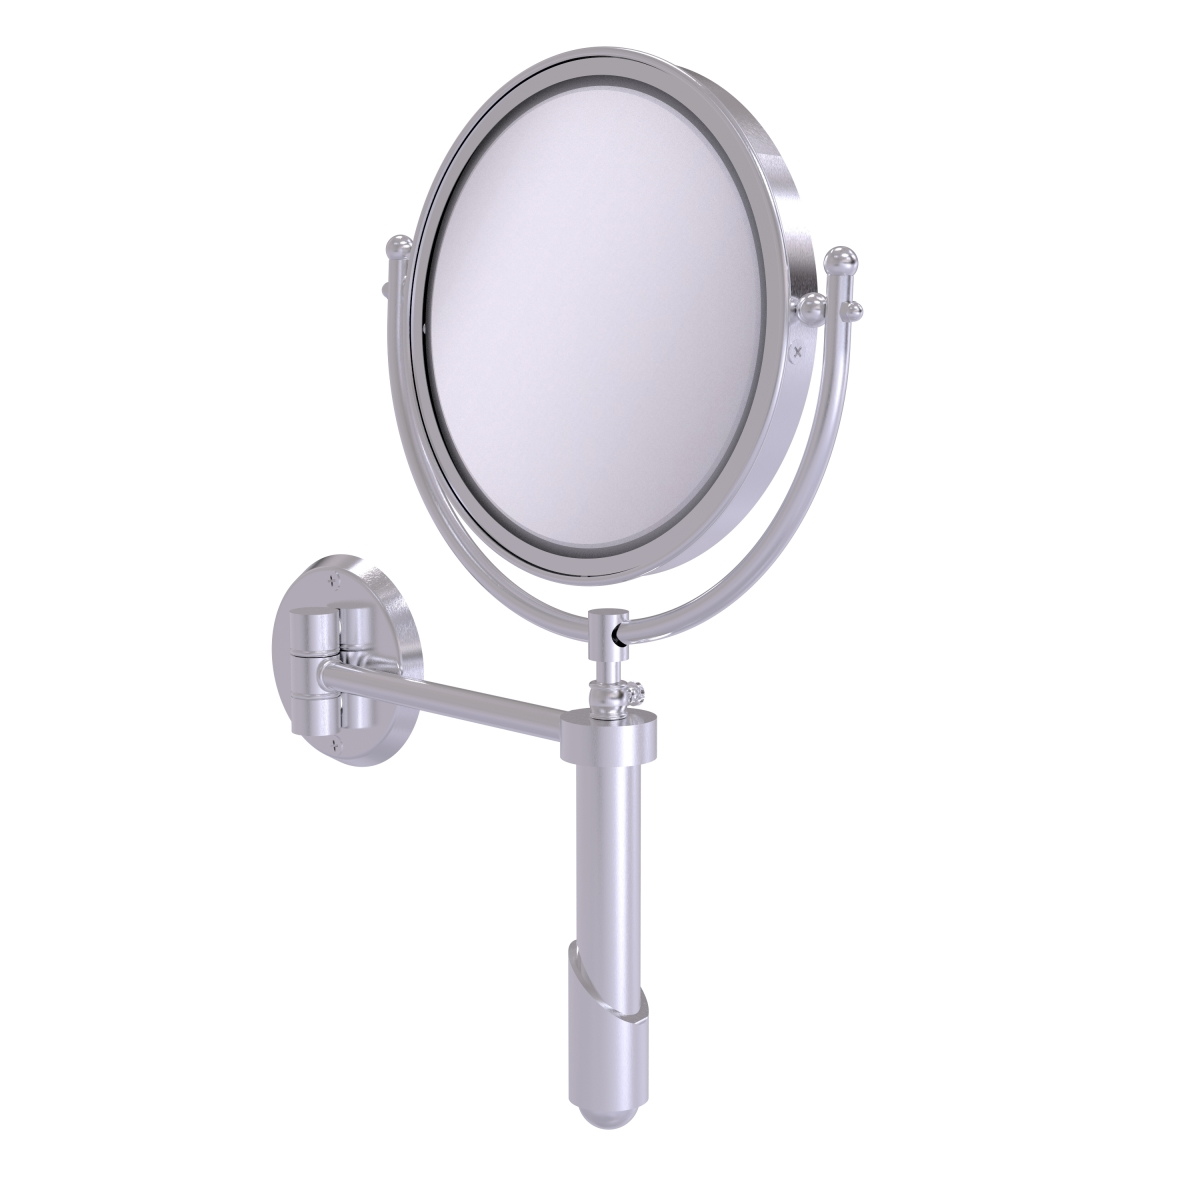 SHM-8-2X-SCH 8 in. dia. Soho Collection Wall Mounted Make-Up Mirror with 2X Magnification, Satin Chrome -  Allied Brass, SHM-8/2X-SCH